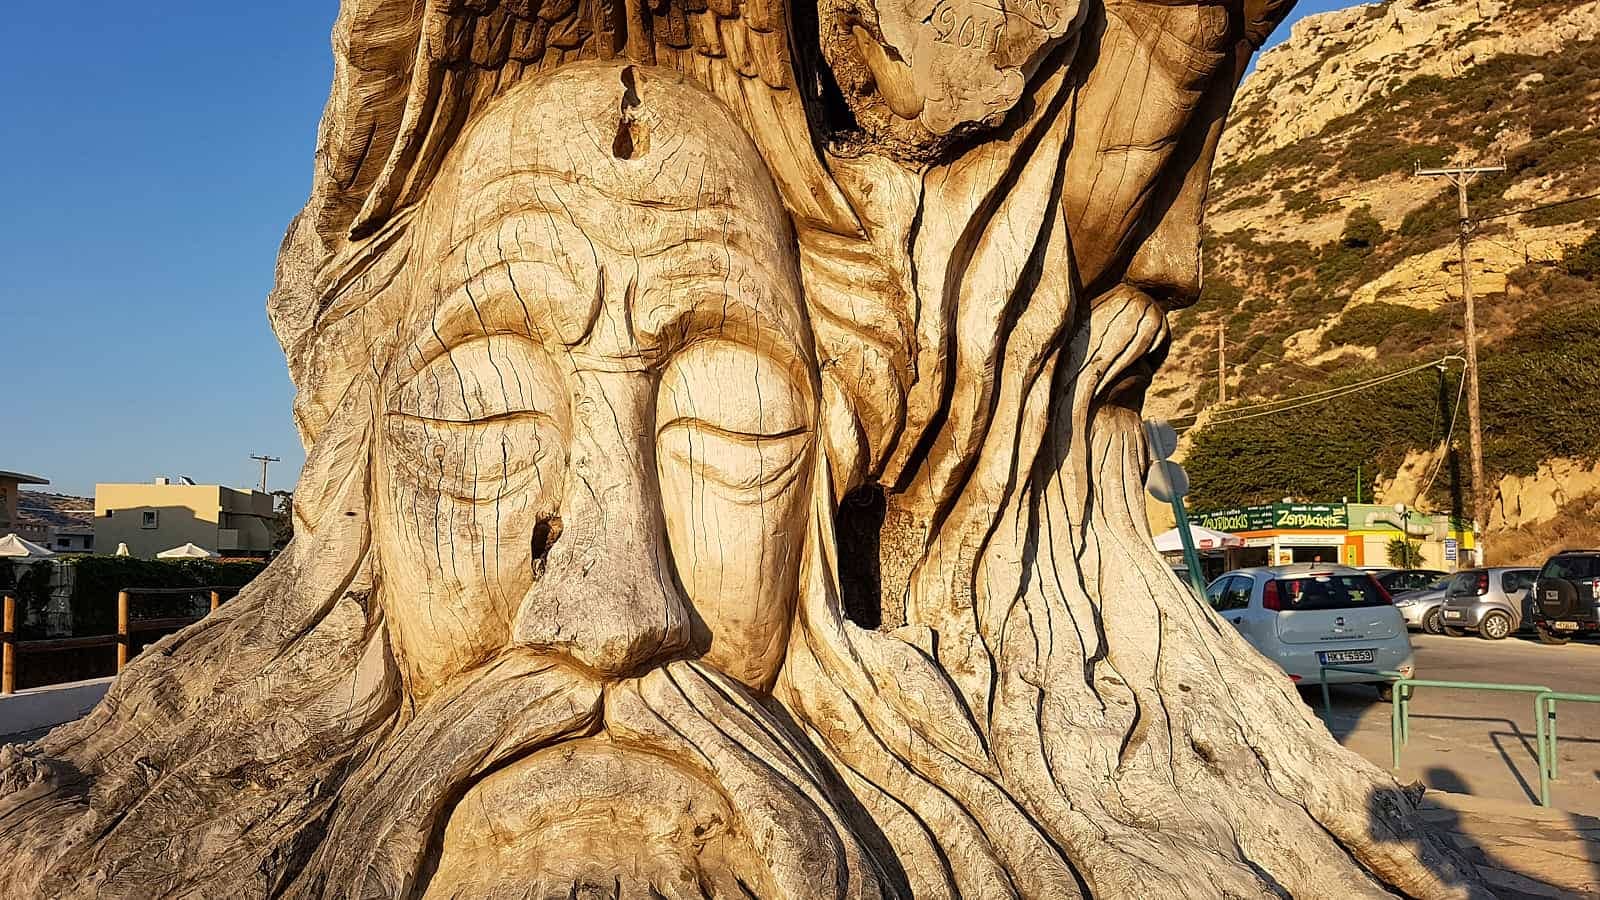 The Old Tree sculpture in Matala carved by Spiros Stefanakis